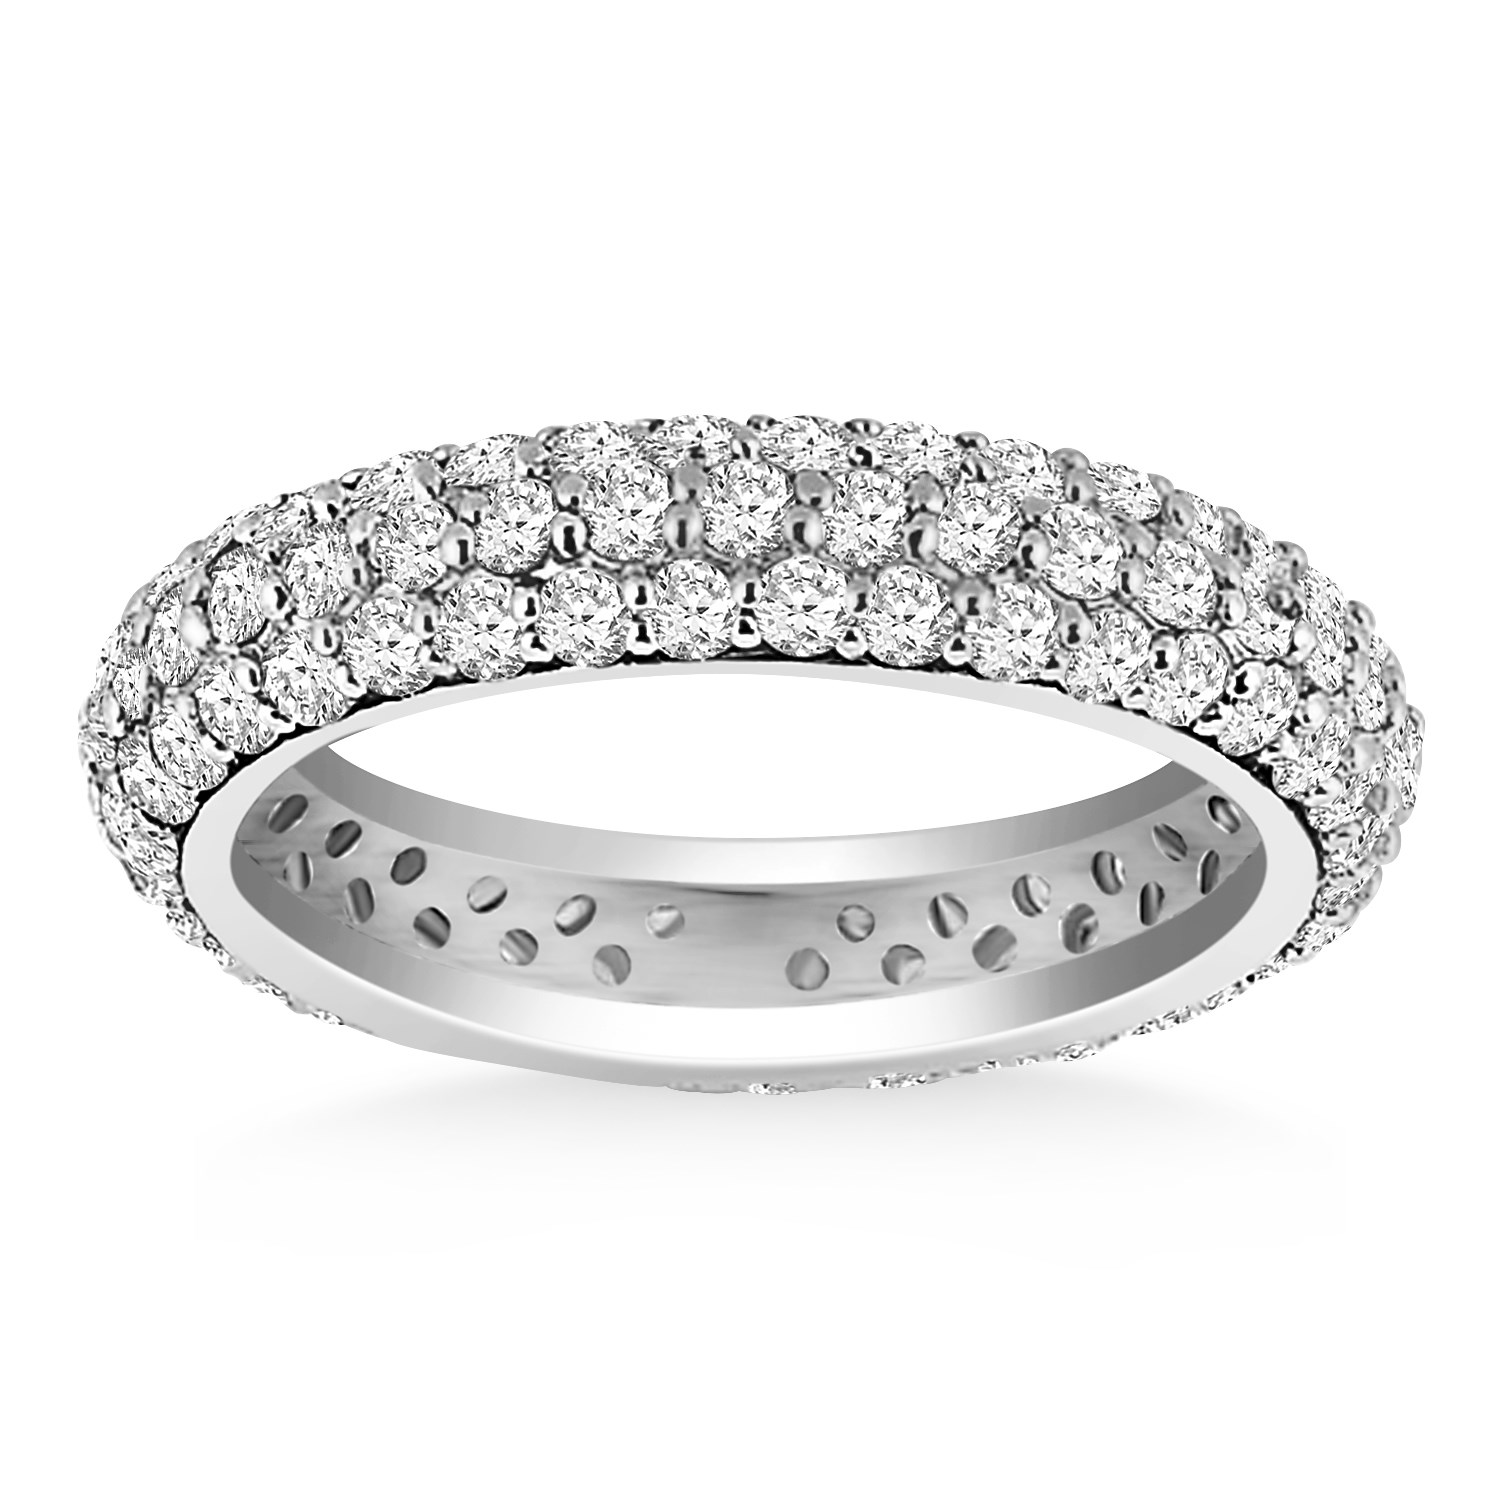 Domed Pave Set Round Diamond Eternity Ring In 14k White Gold Richard Cannon Jewelry